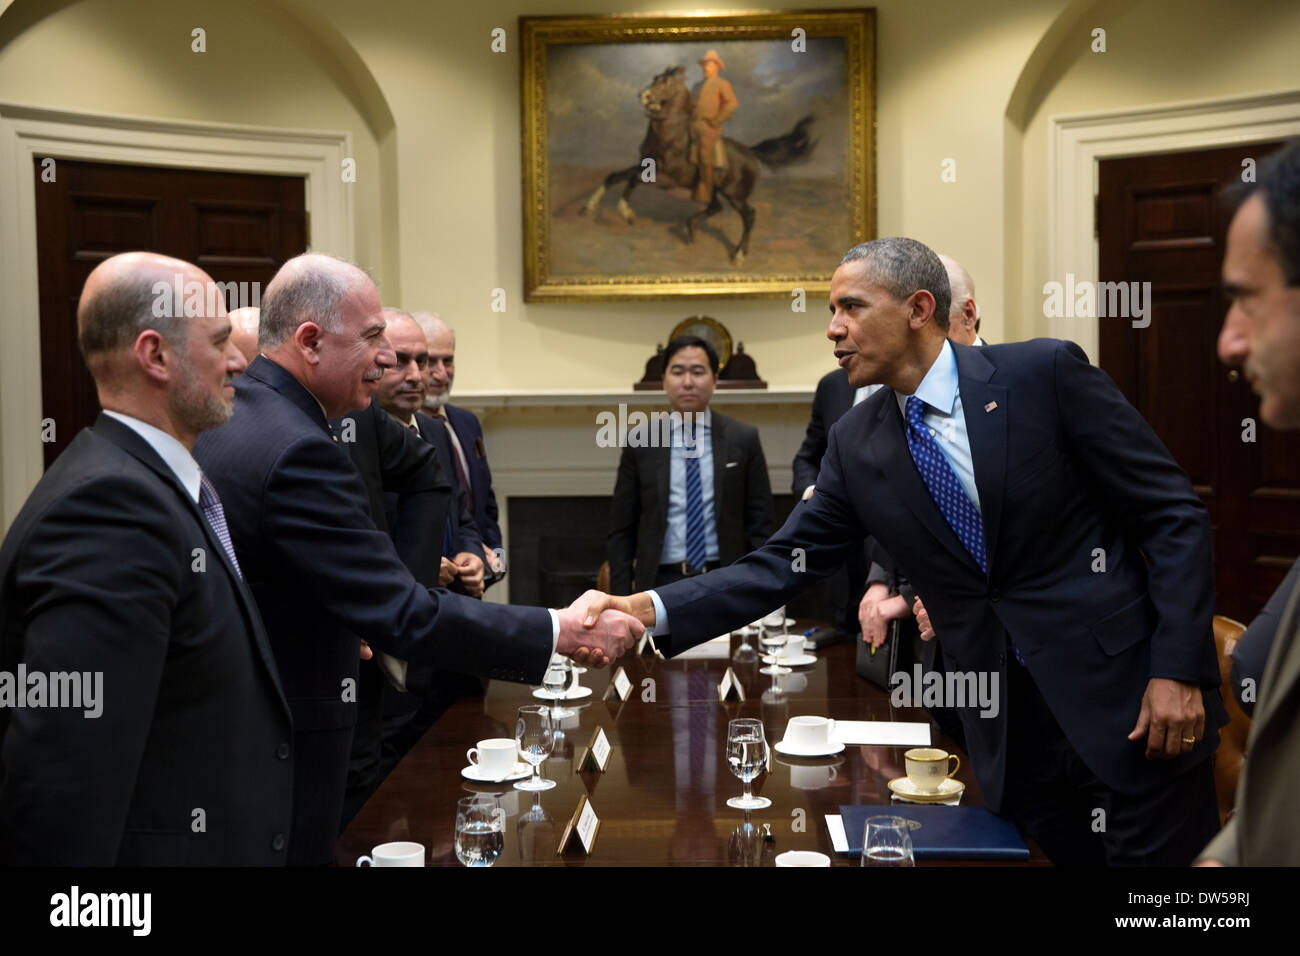 President Barack Obama greets Speaker Osama al-Nujaifi, Iraqi Council of Representatives, after he drops by Vice President Joe Biden's meeting with the Speaker in the Roosevelt Room of the White House, Jan. 22, 2014. Stock Photo